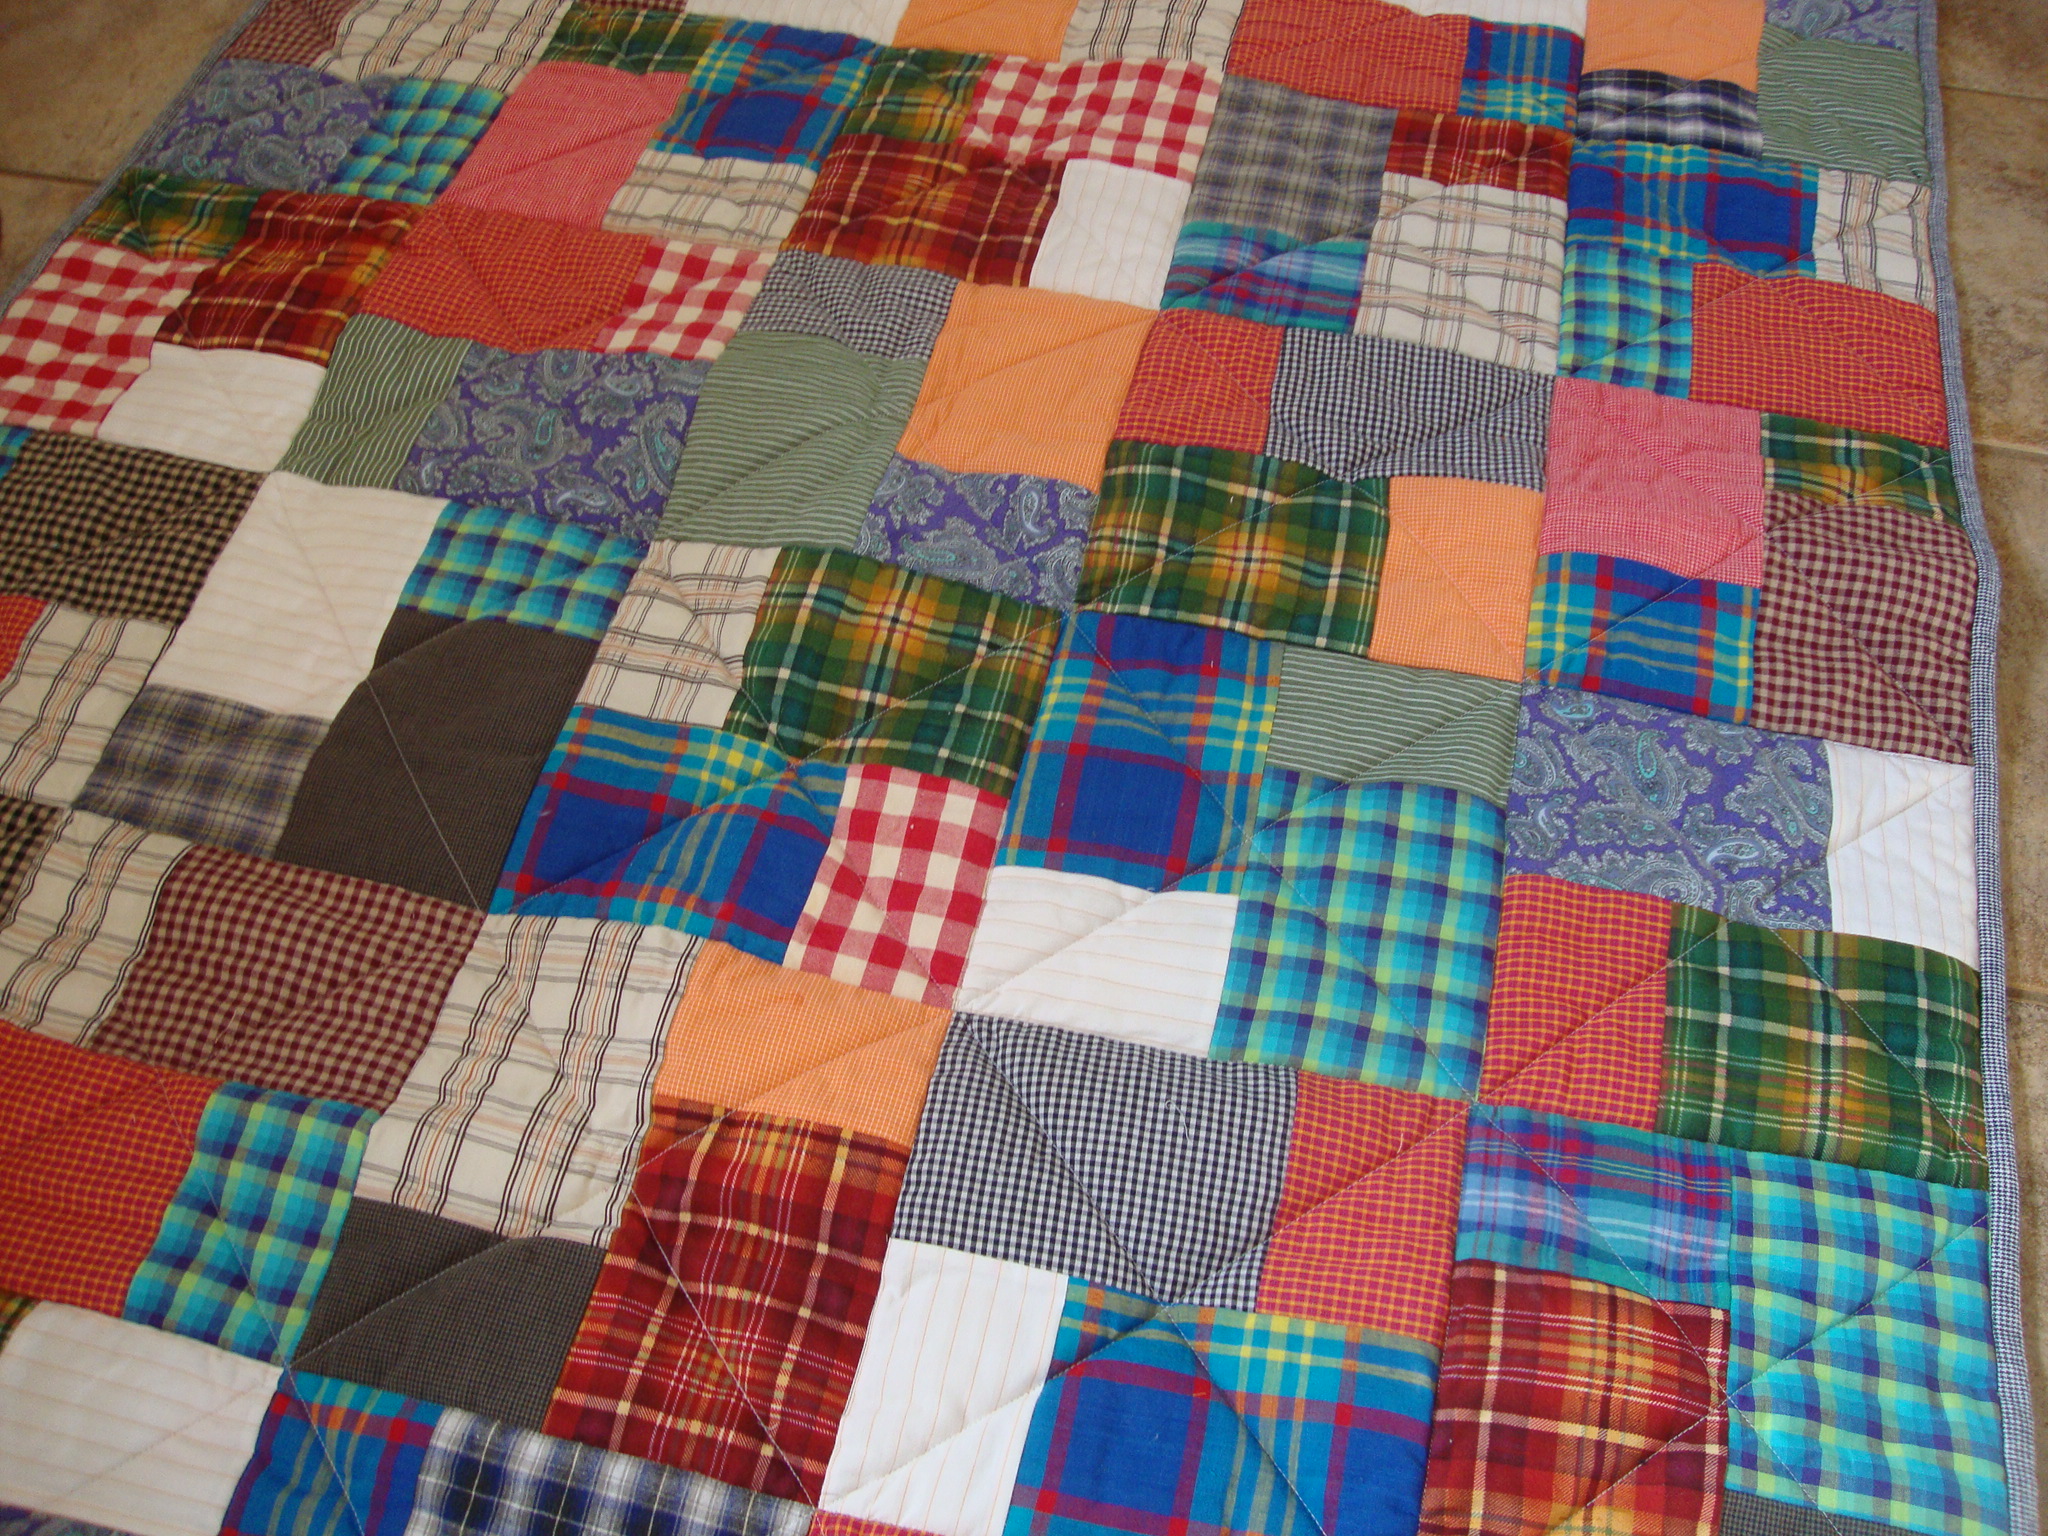 Cozy Utility Quilt to Donate - Quiltingboard Forums